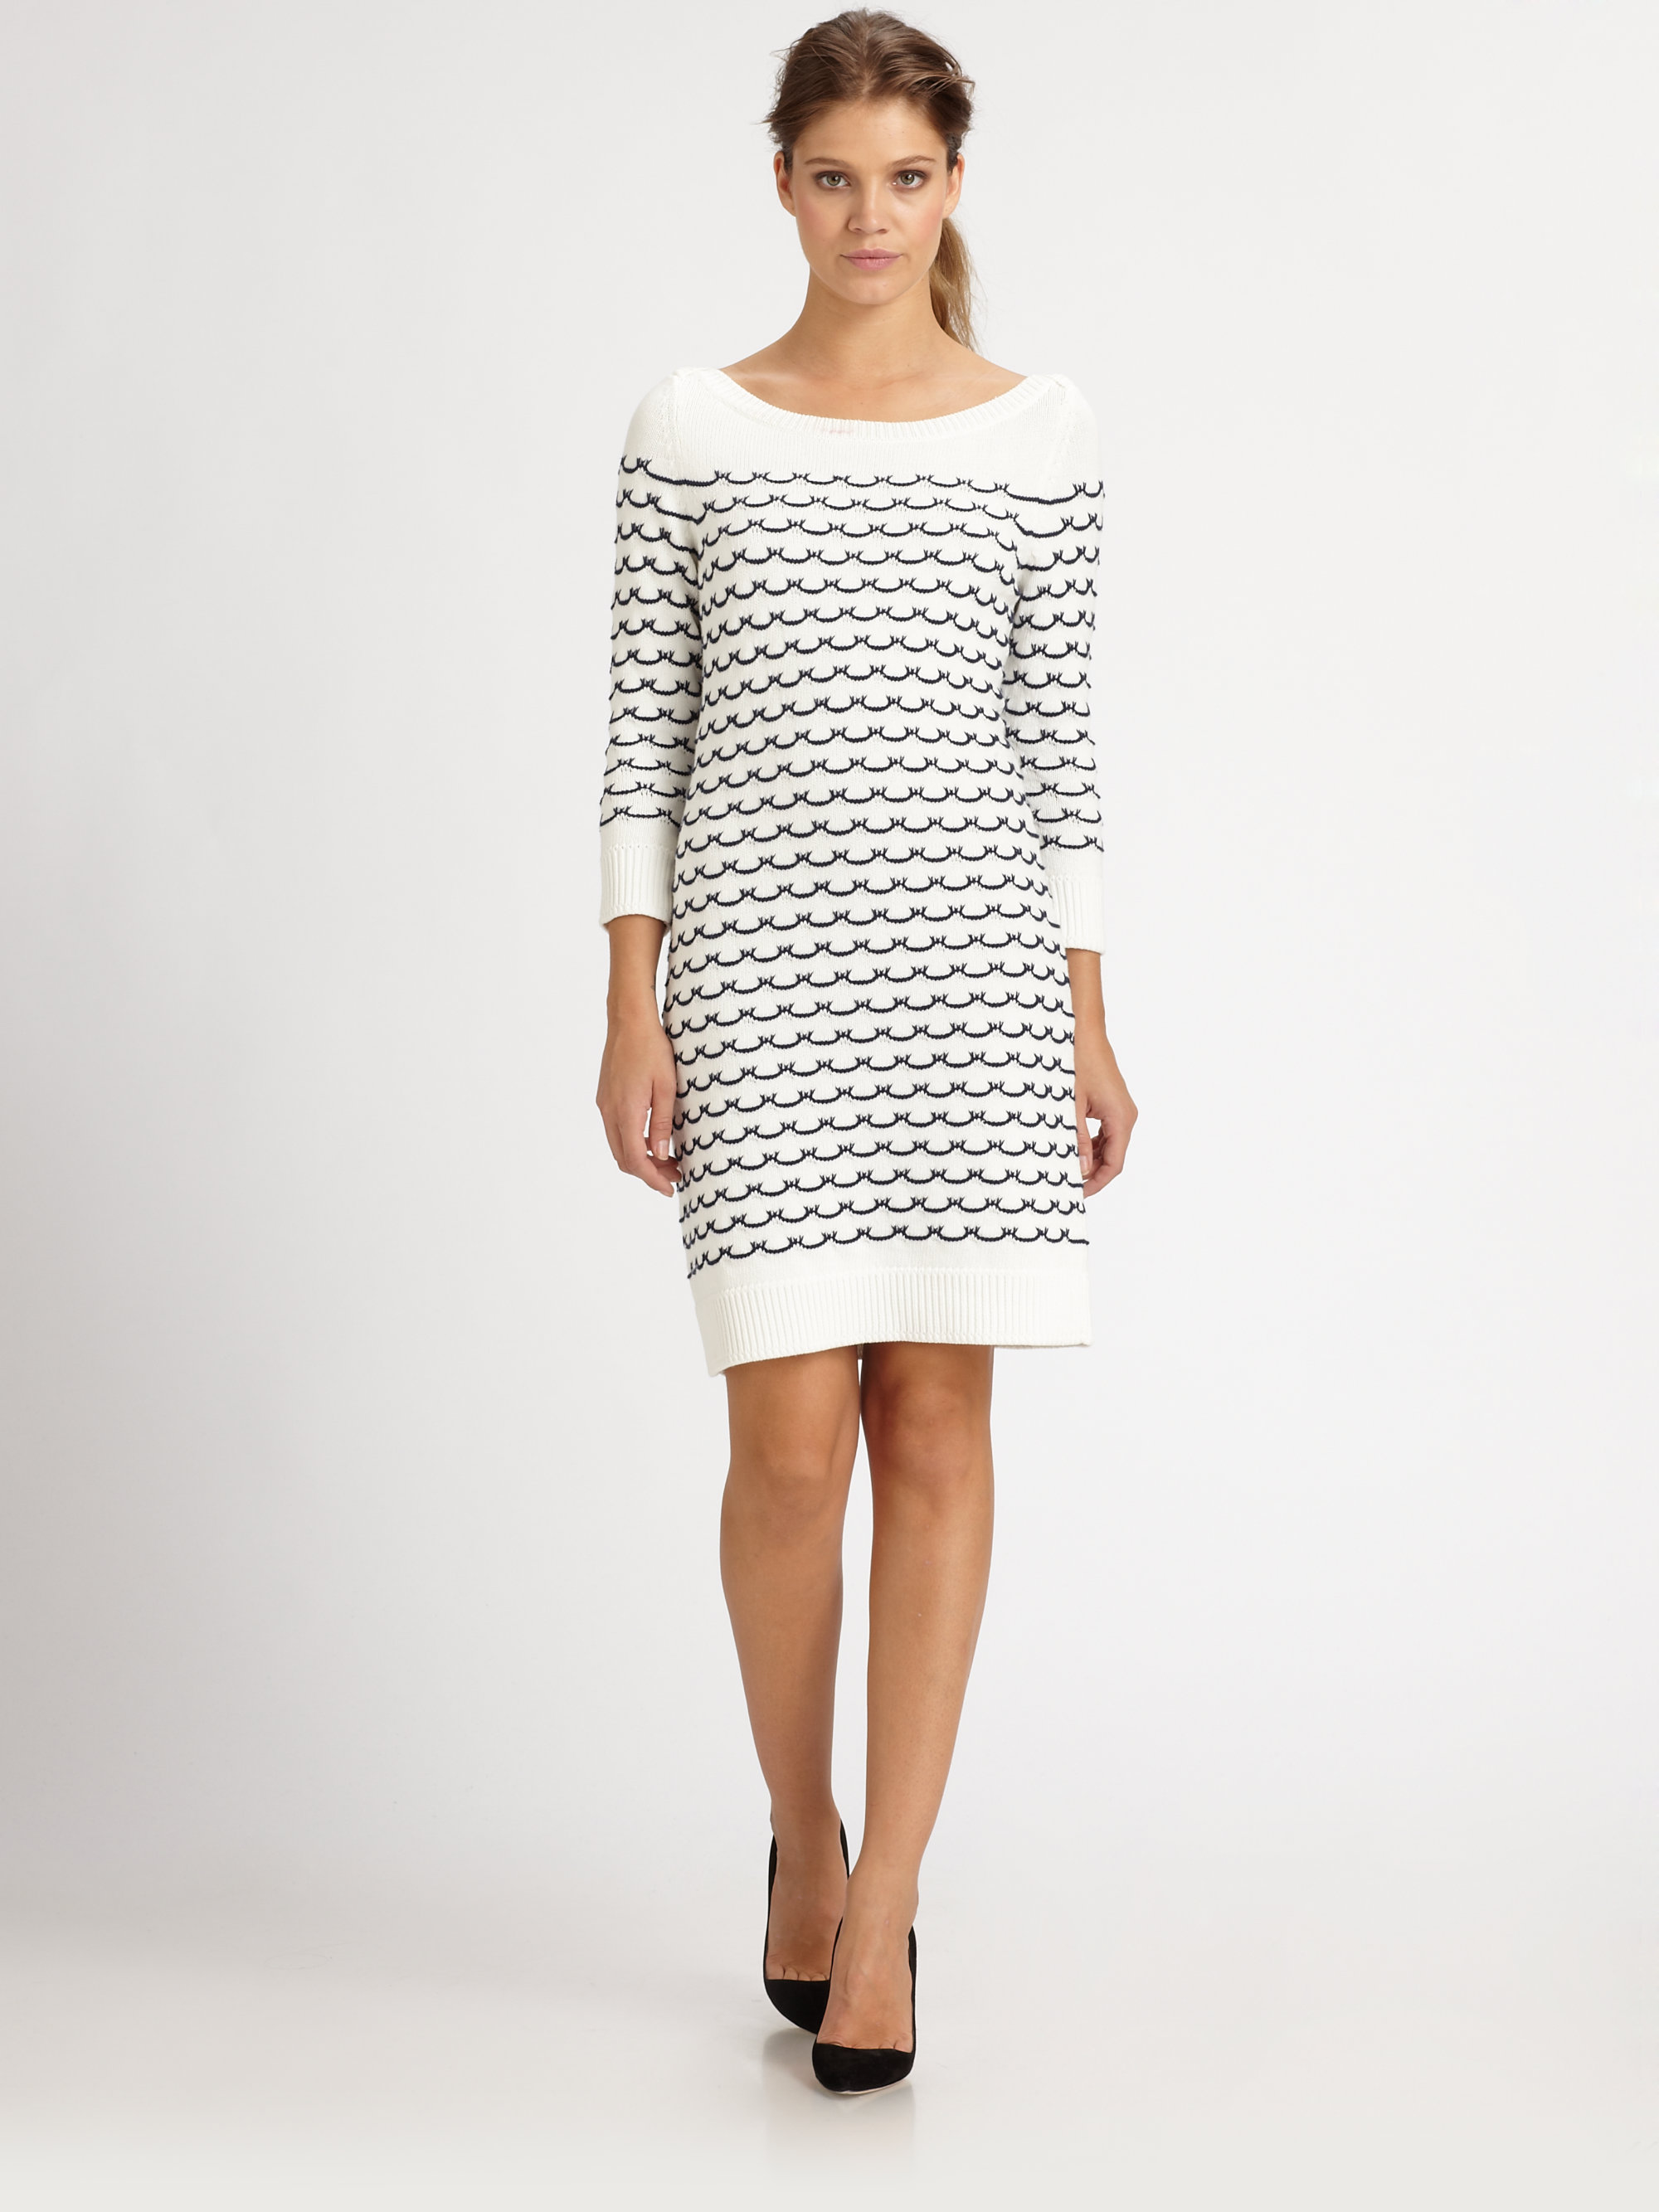 Lyst - Milly Sailor Stitch Sweater Dress in White